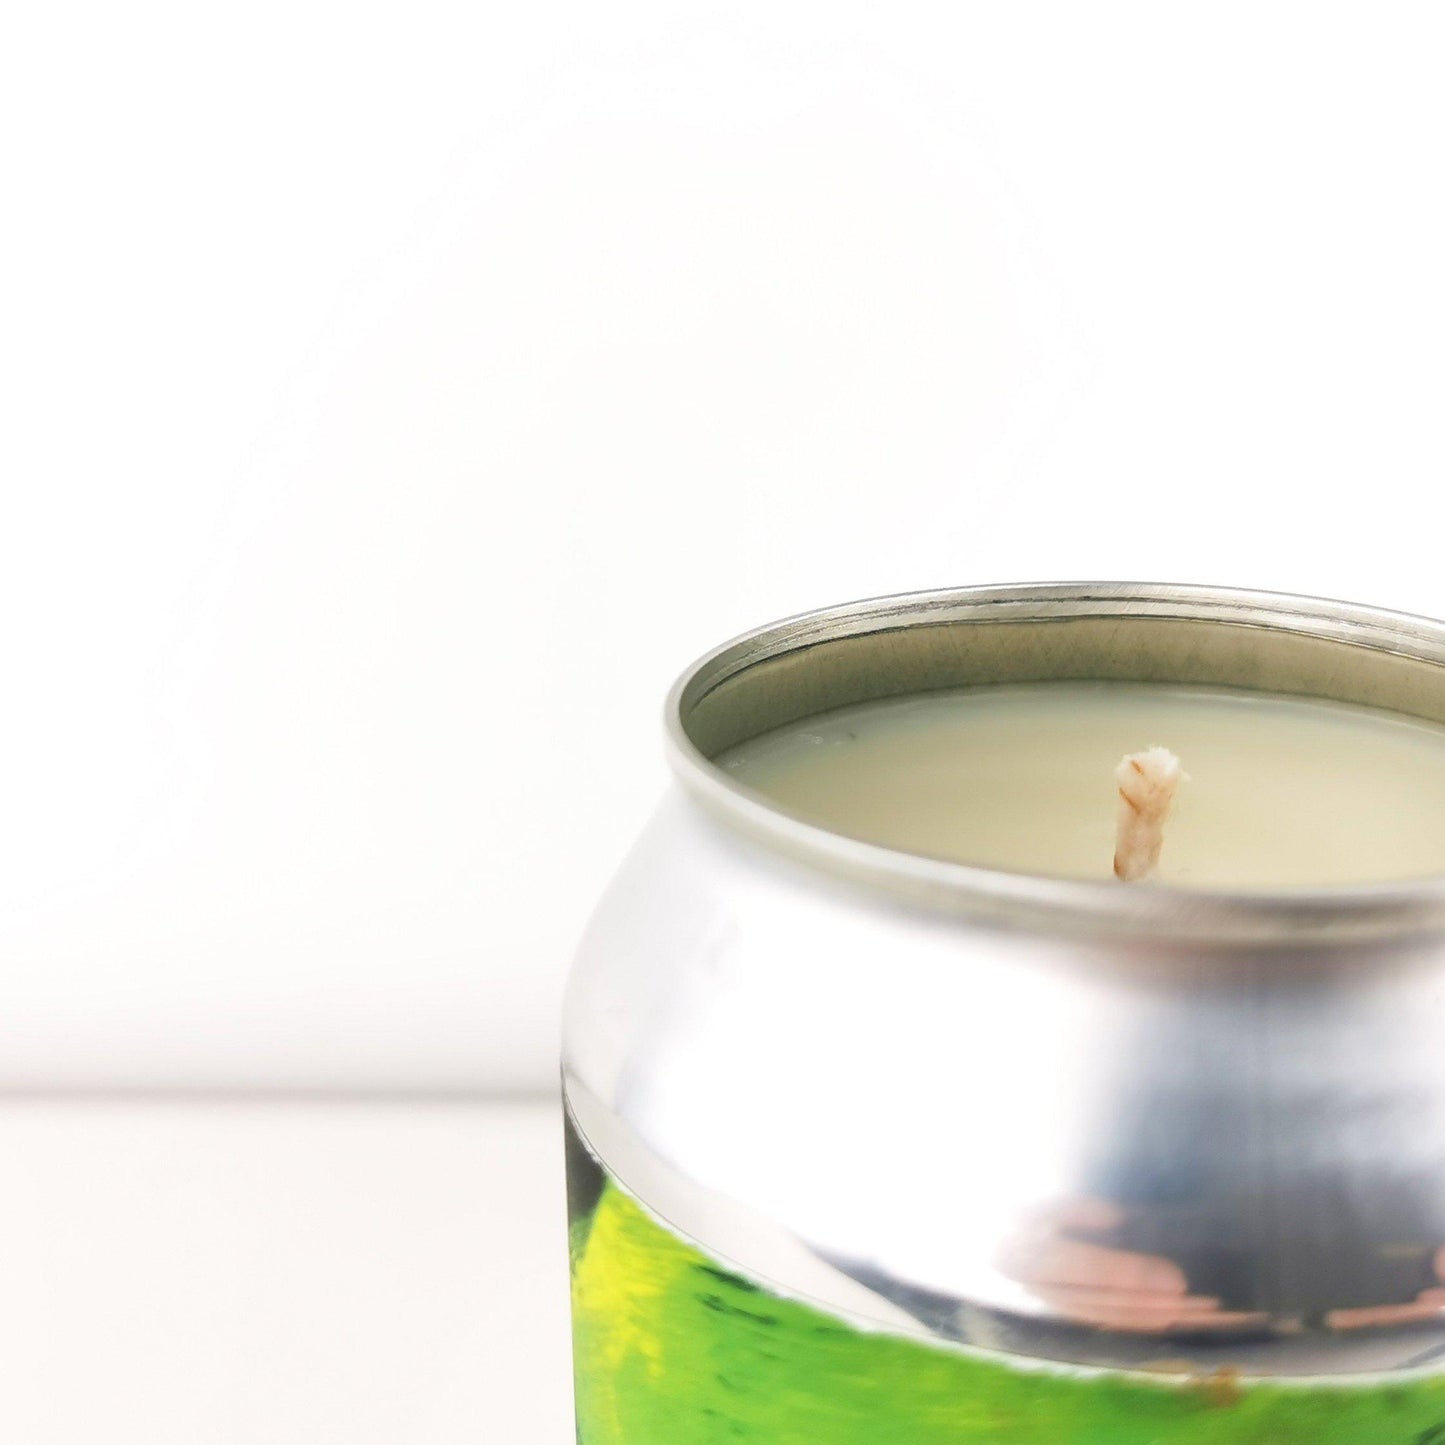 Via the Hourglass by Polly's Brew Craft Beer Can Candle-Beer Can Candles-Adhock Homeware